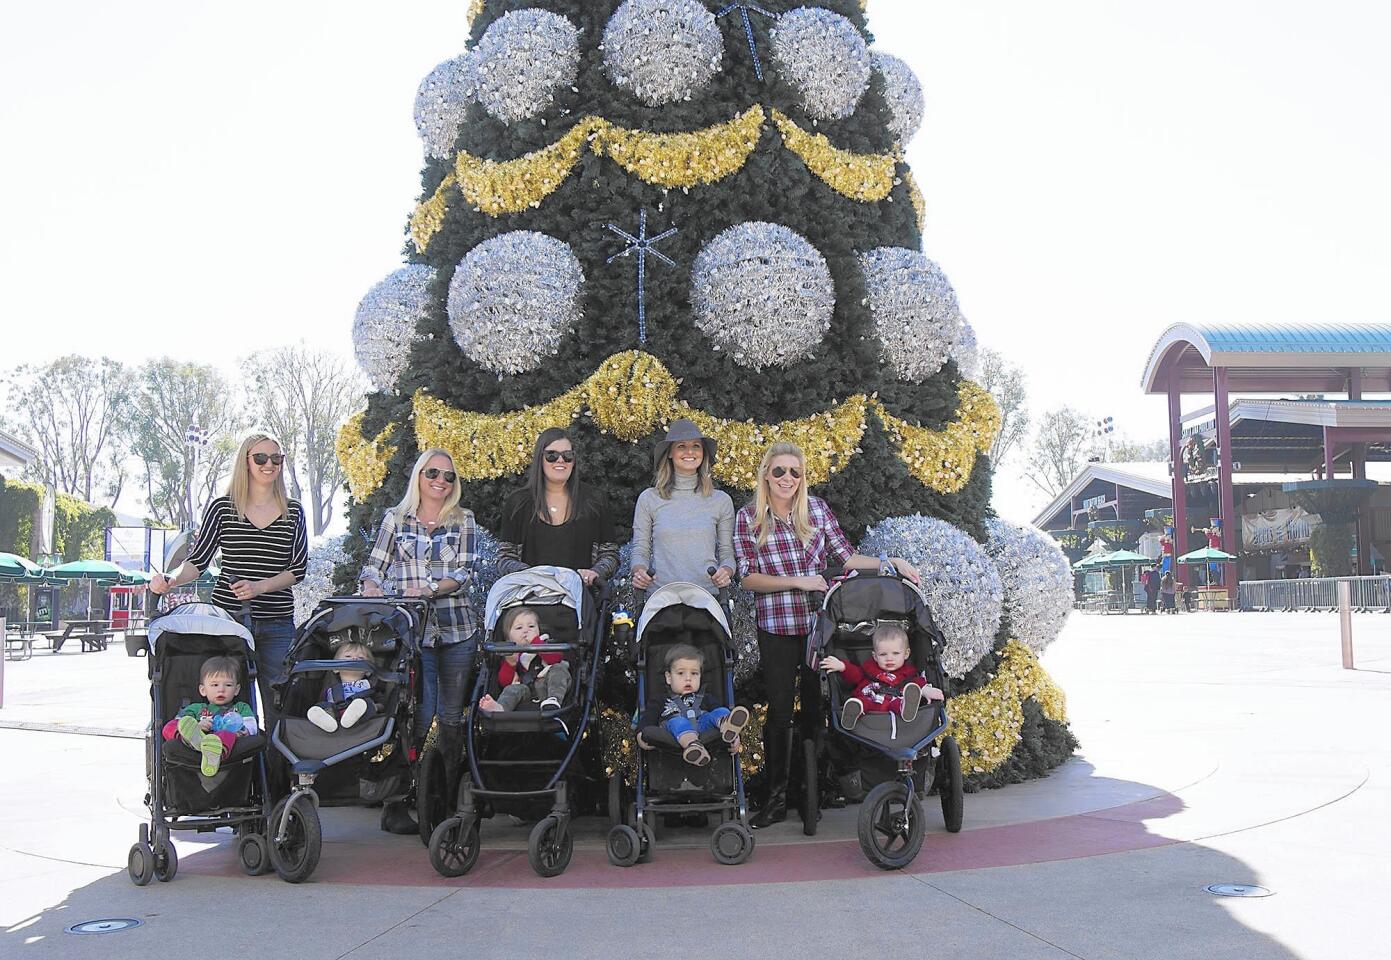 A group of mohters with their kids in strollers gather for picture at the central tree at the Winter Fest at the Orange County Fair and Events Center on Friday.